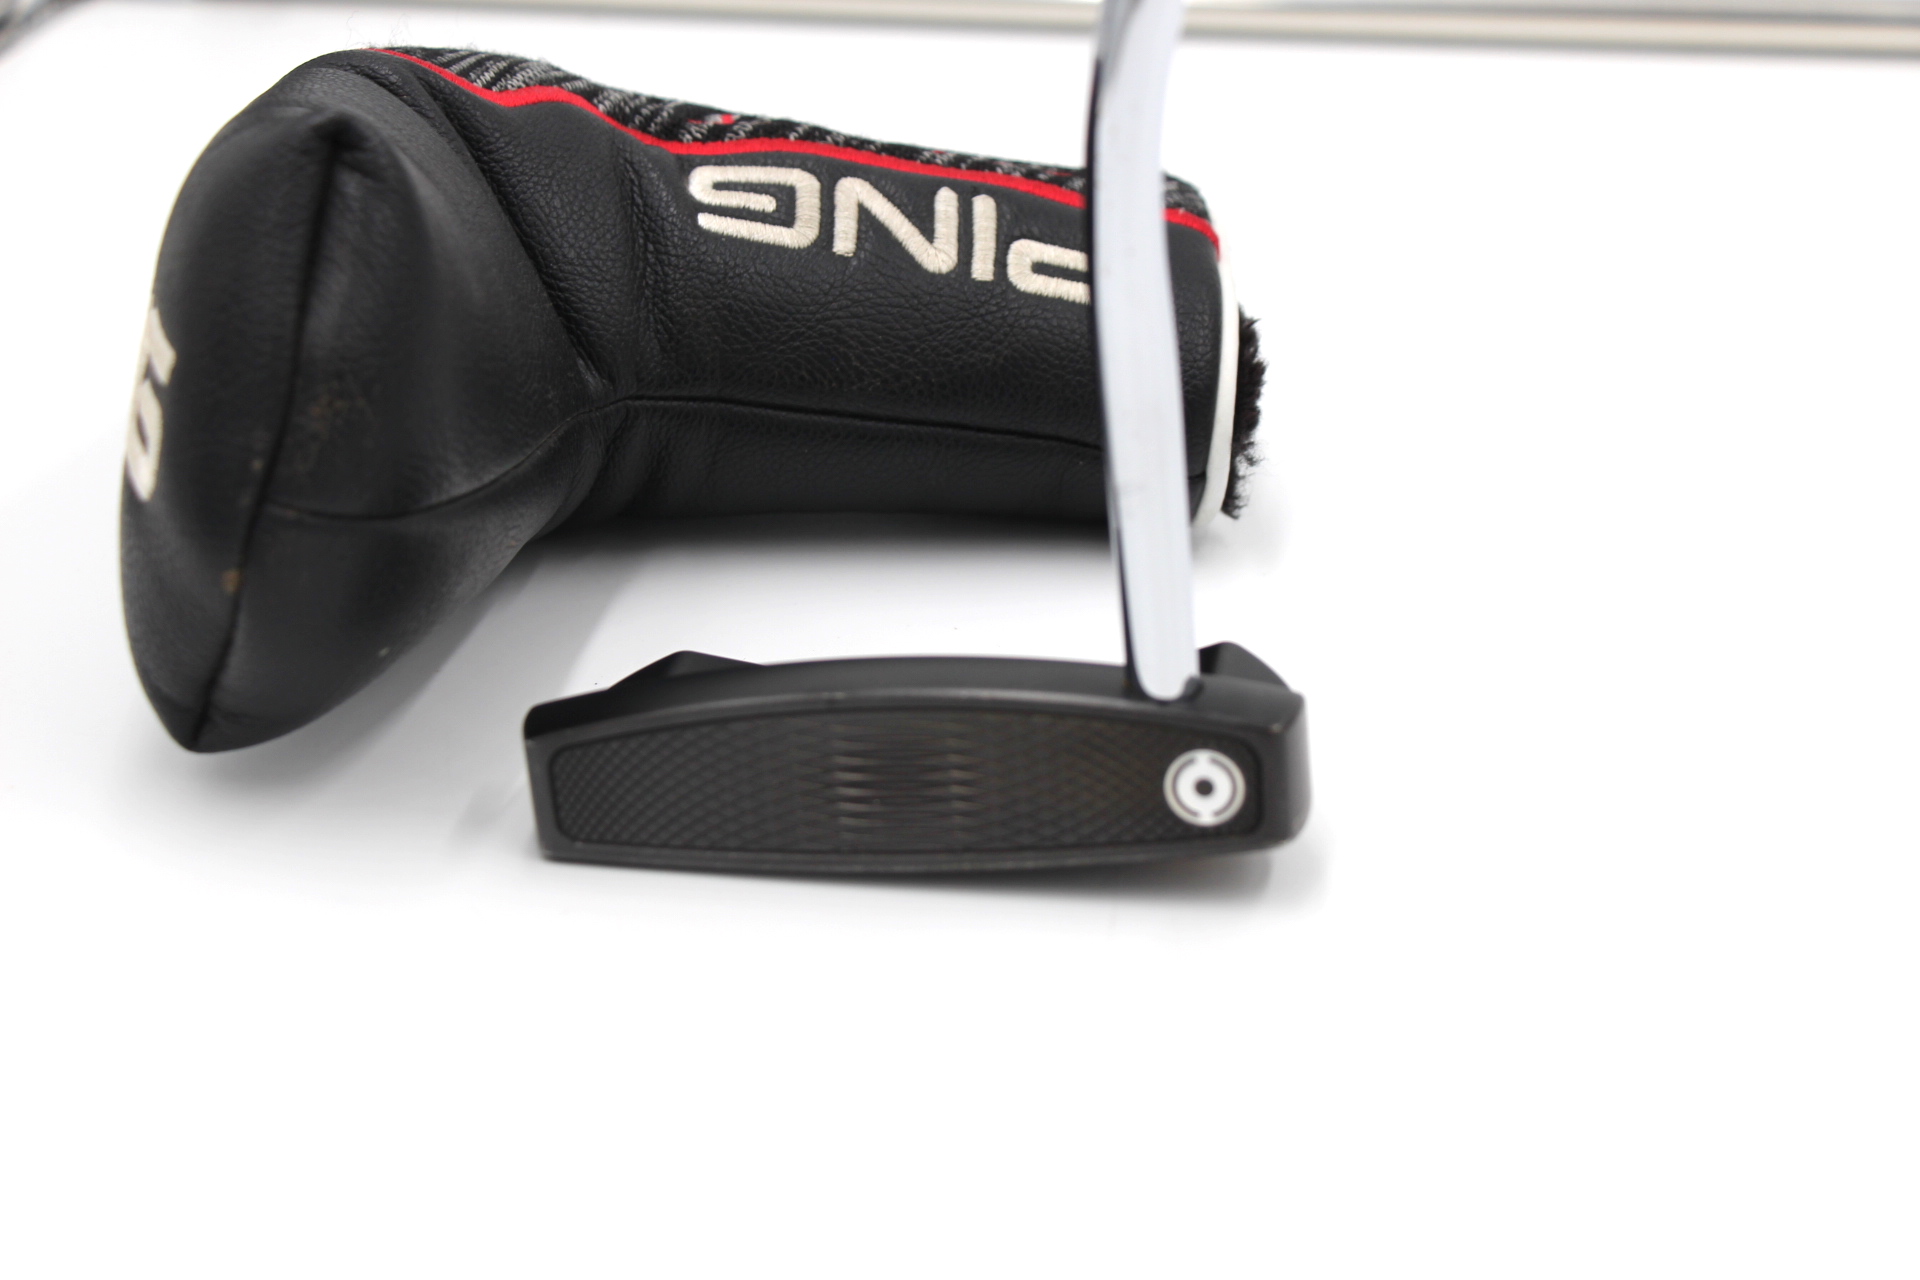 Ping Vault 2.0 Piper Stealth Putter